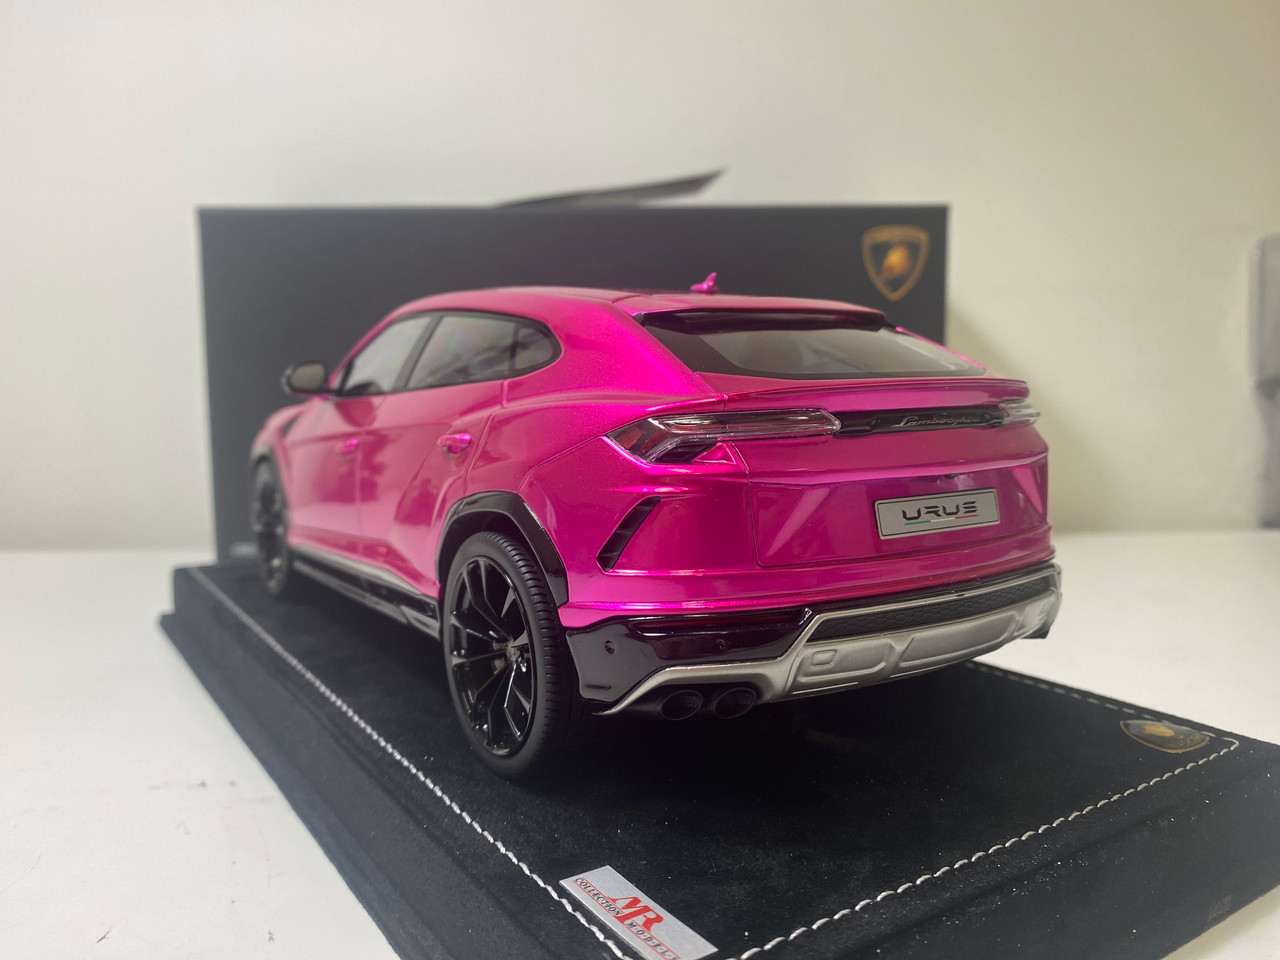 1/18 MR Collection Lamborghini Urus (Flash Gloss Pink) with Black Gloss Wheels & Yellow Calipers Car Model Limited 10 Pieces